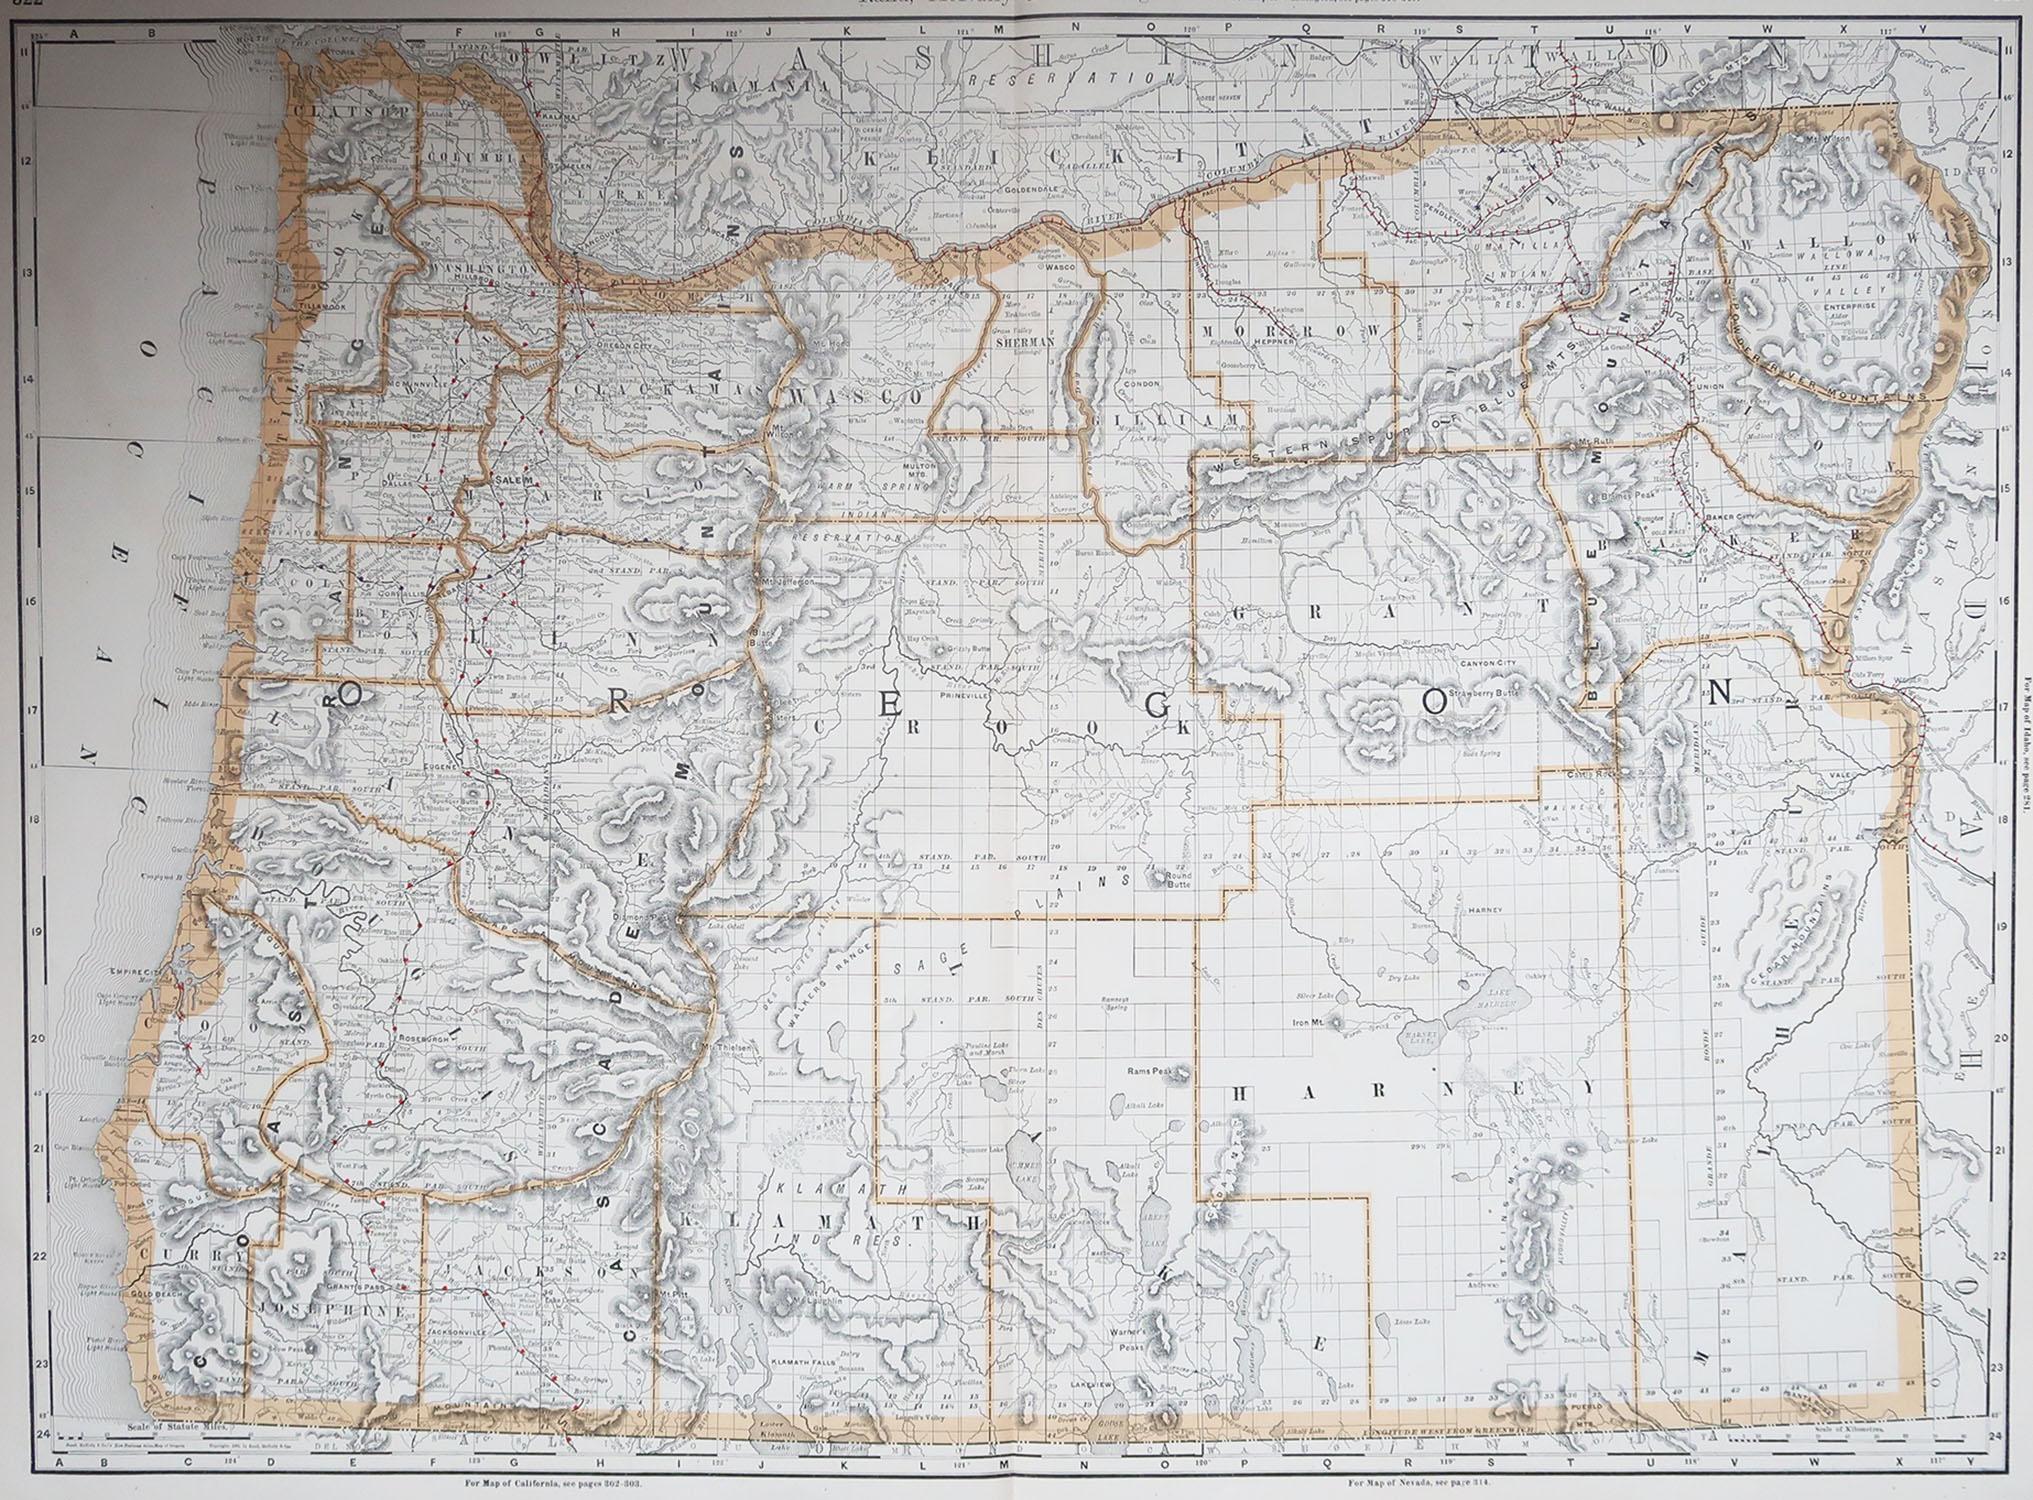 Fabulous map of Oregon.

Original color.

By Rand, McNally & Co.

Published, 1894.

Unframed.

Free shipping.